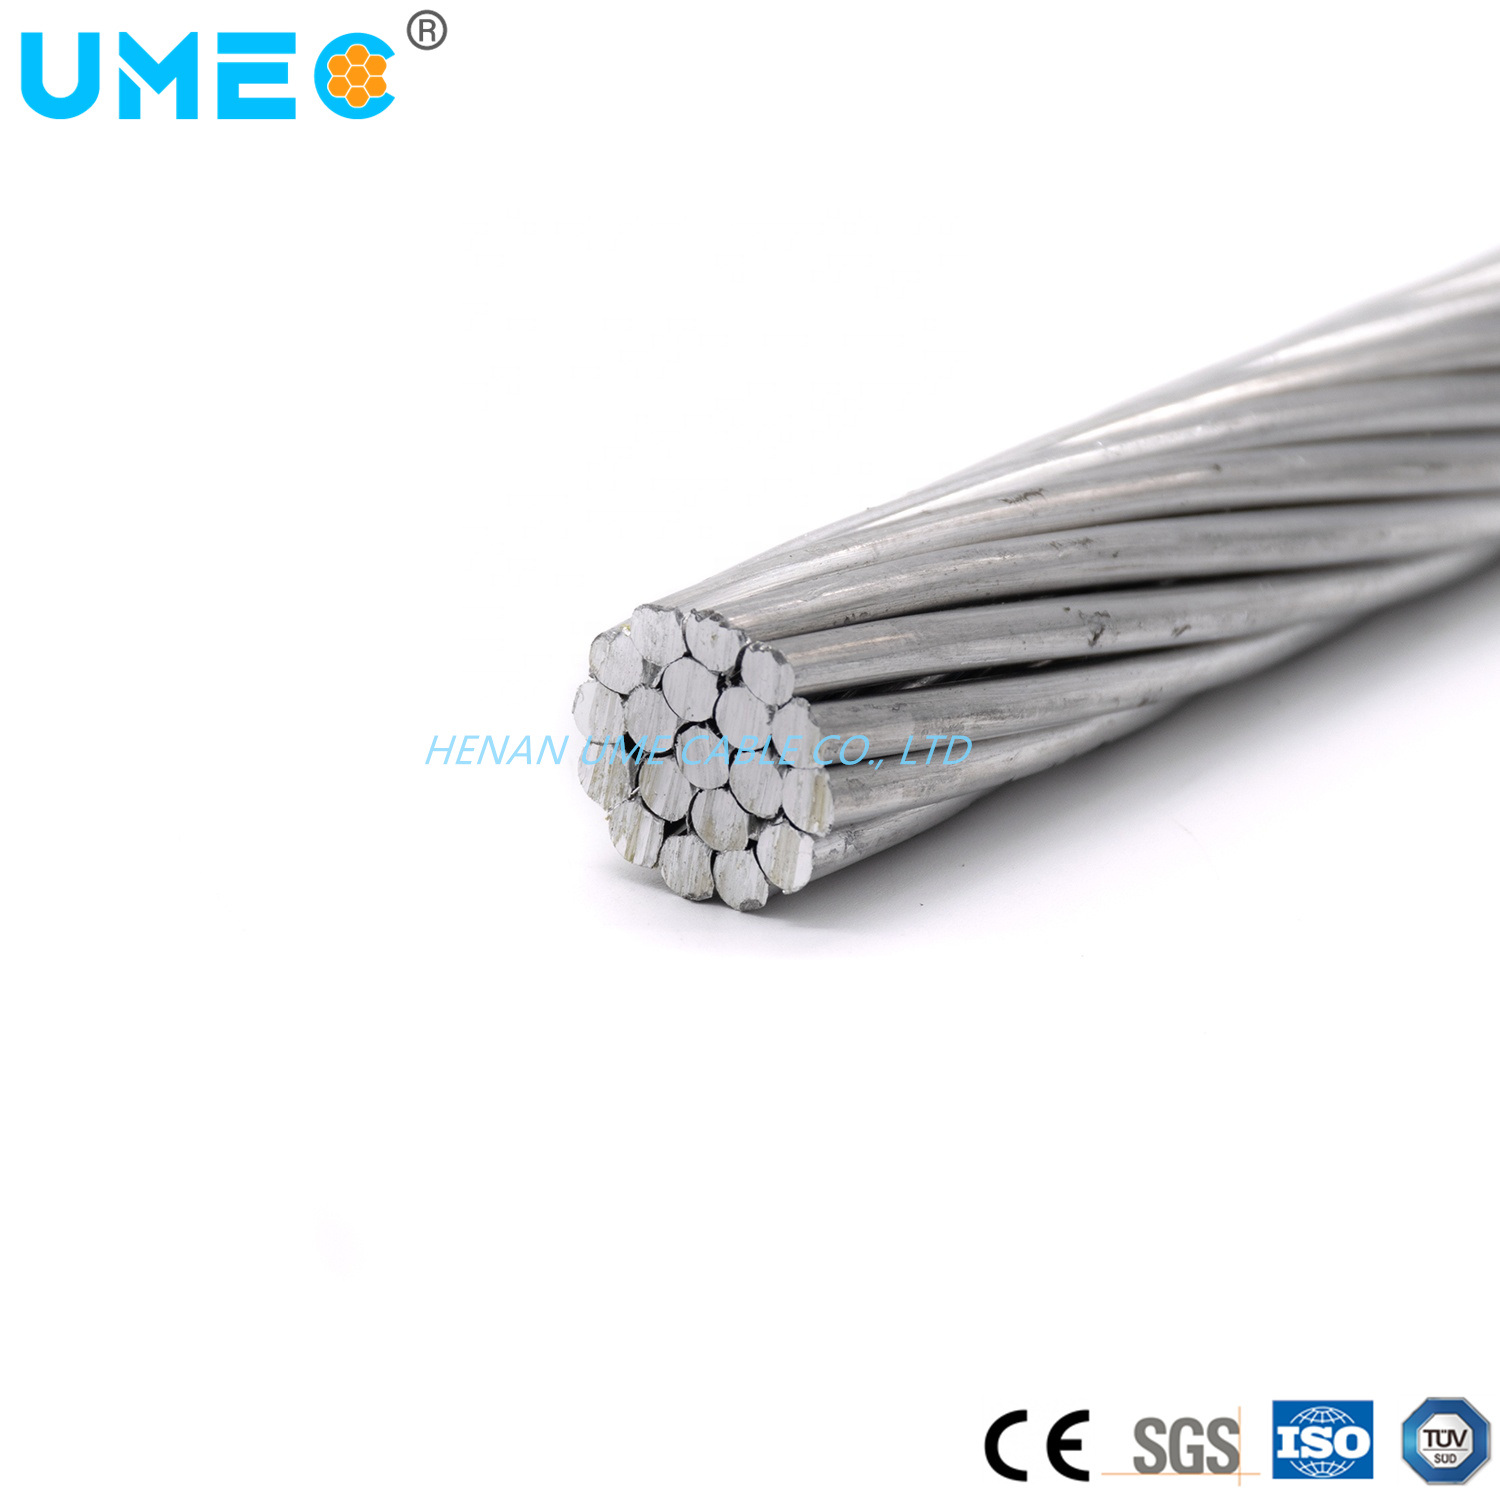 Concentric Stranded Aluminum 1350-H19 Wires Acar Conductor